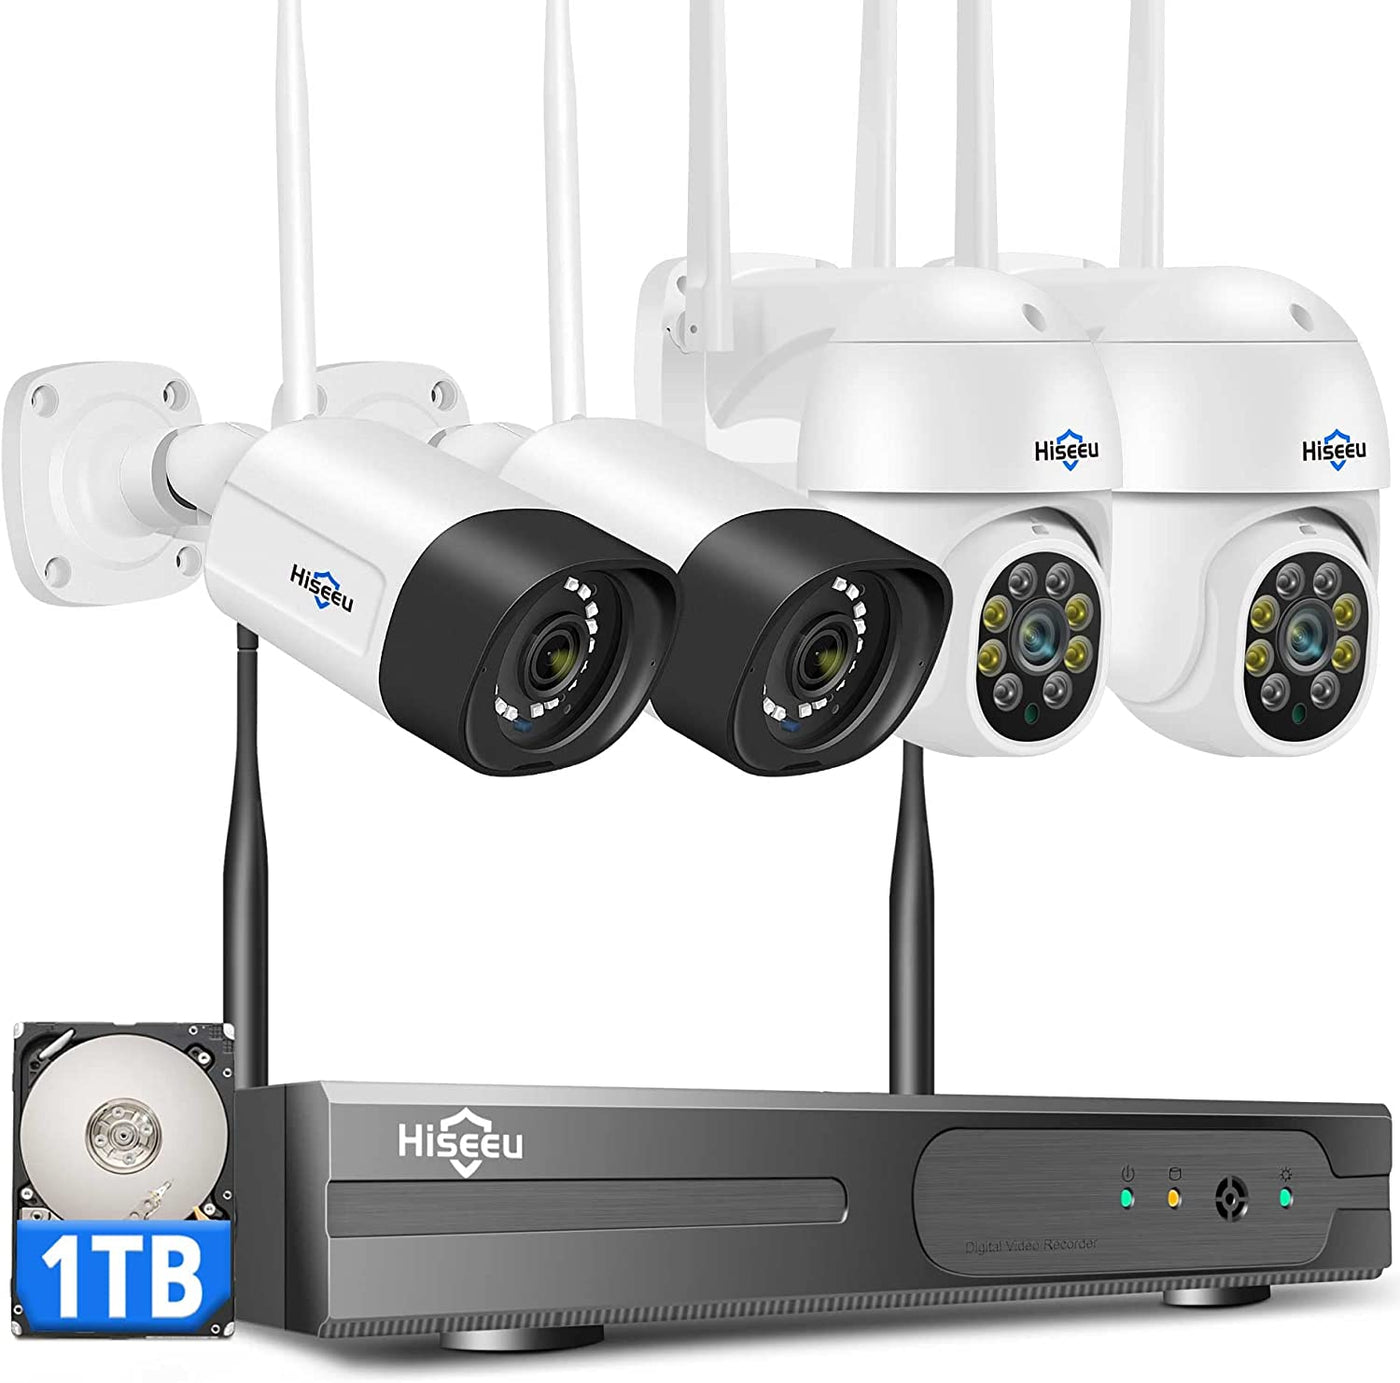 Hiseeu 2K WiFi Security Camera System Outdoor 3MP Dome PTZ Cameras and Bullet Cameras Surveillance Mobile&PC Remote,IP66 Waterproof,Night Vision,7/24/Motion Record,Motion Alert,Two Way Audio（refurbished）